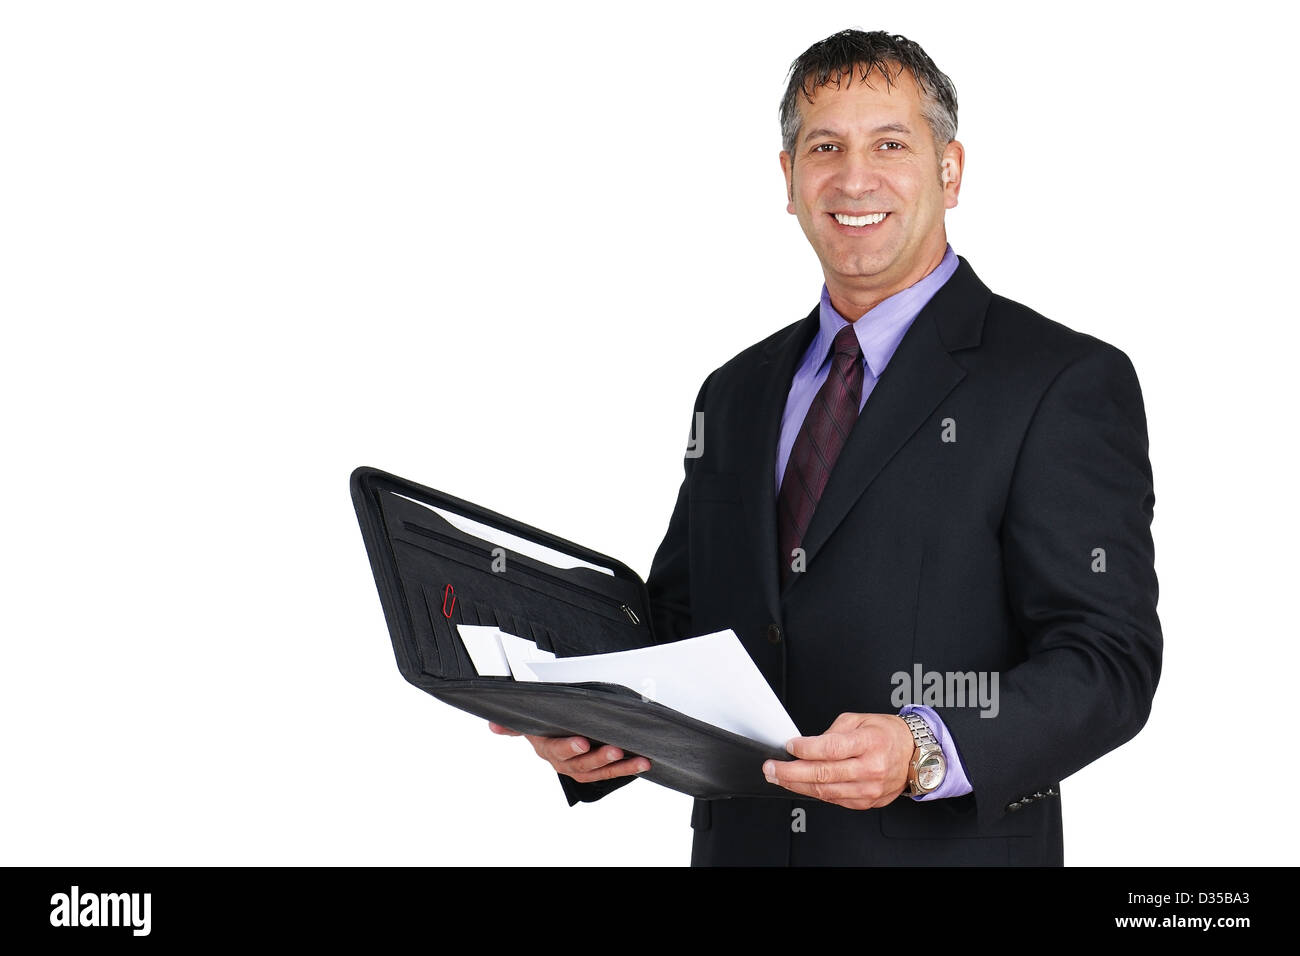 Man in suit and tie, holding paperwork and smiling, can be boss or management employee. Stock Photo